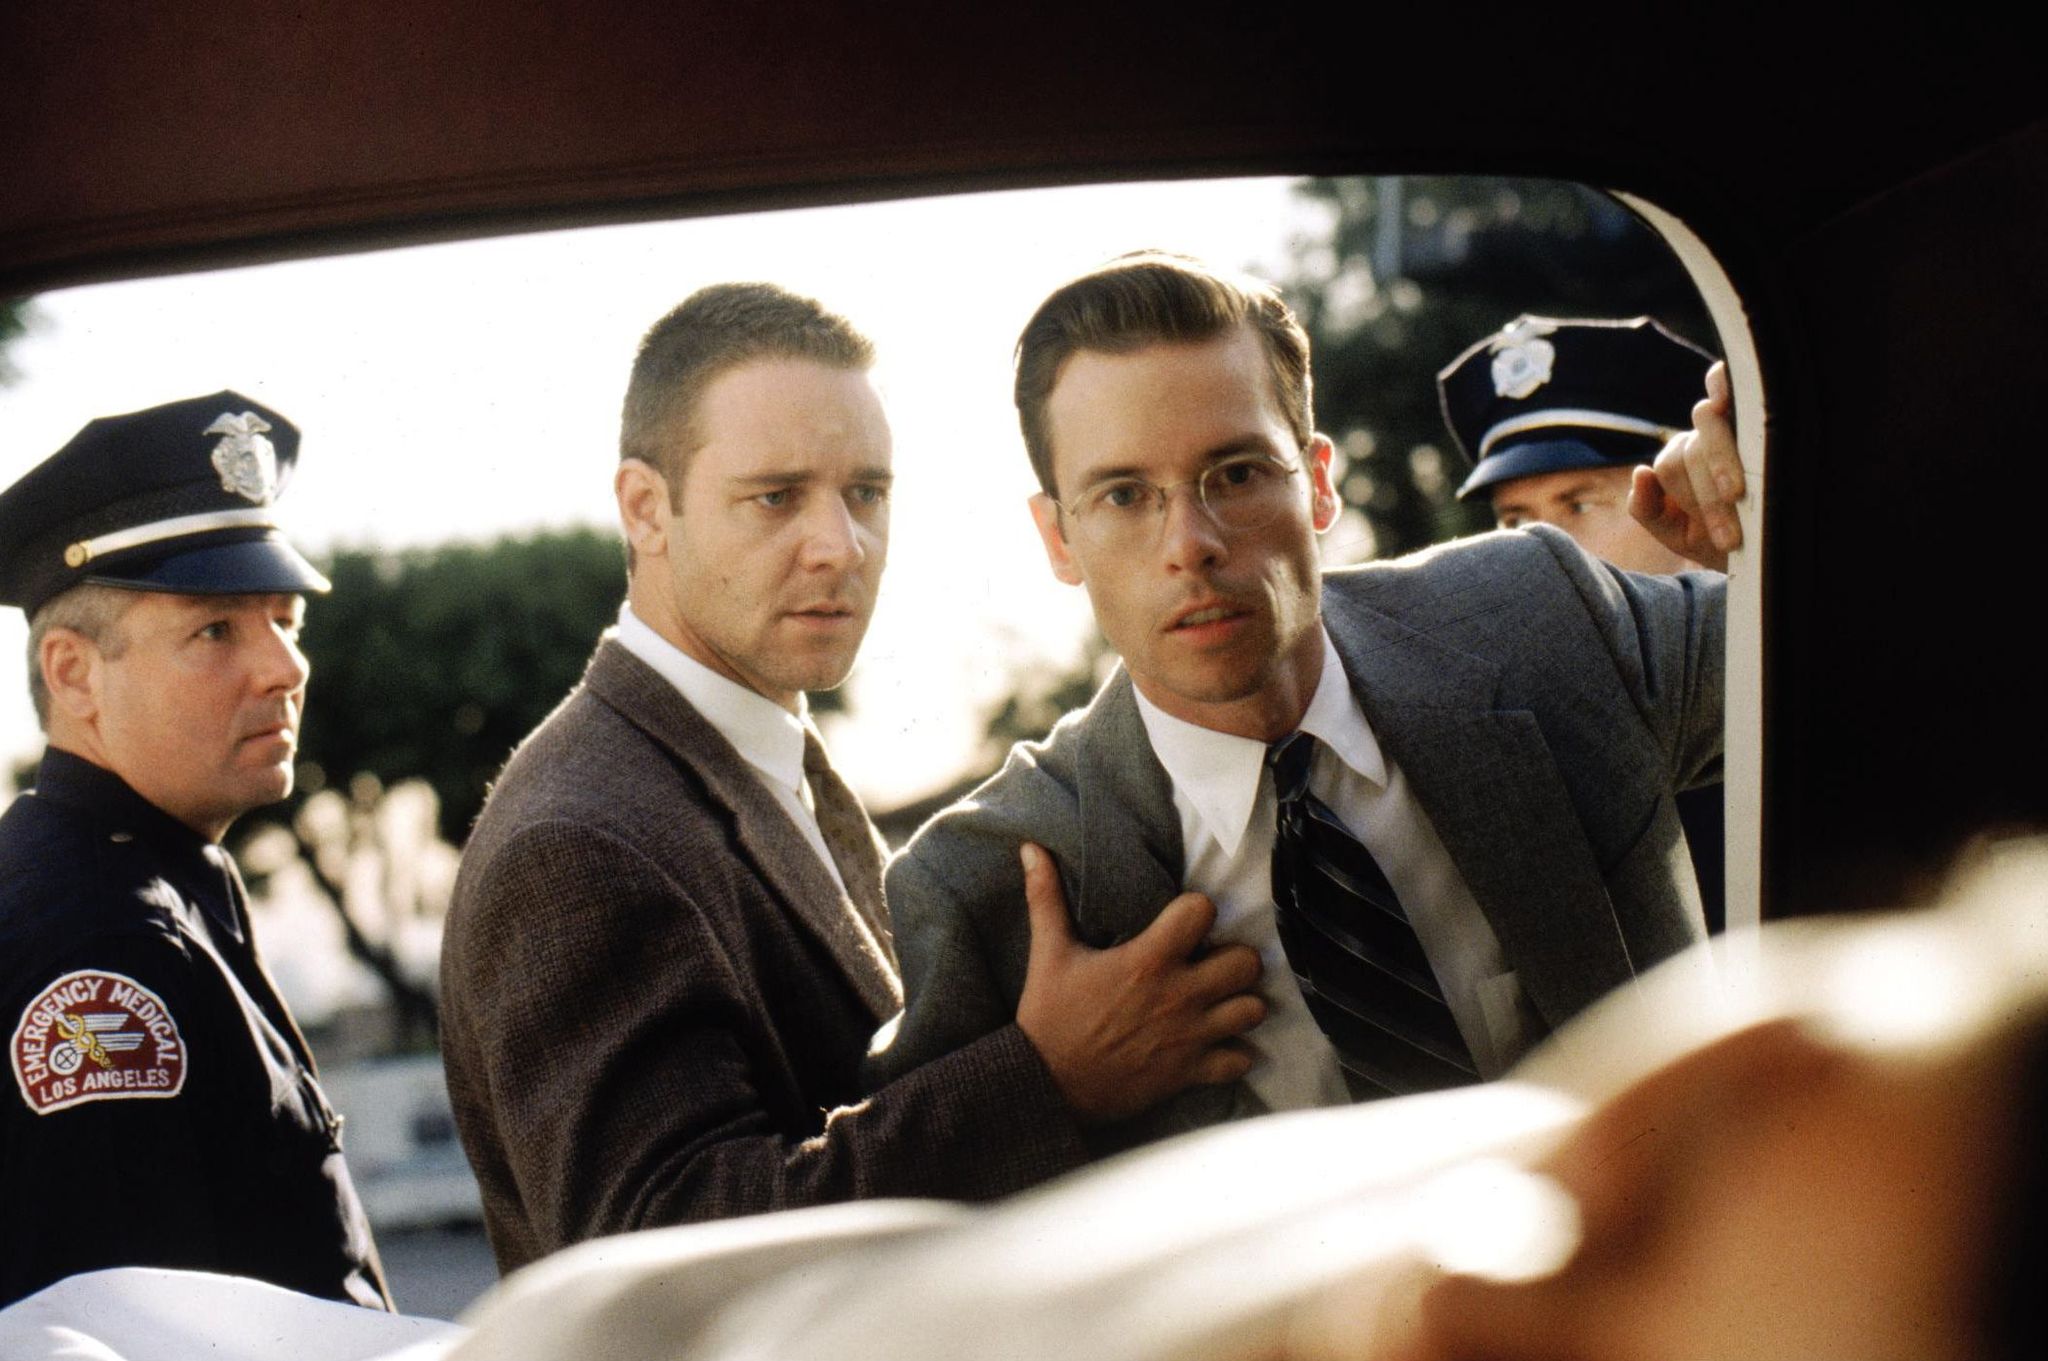 Still of Russell Crowe and Guy Pearce in Los Andzelas slaptai (1997)